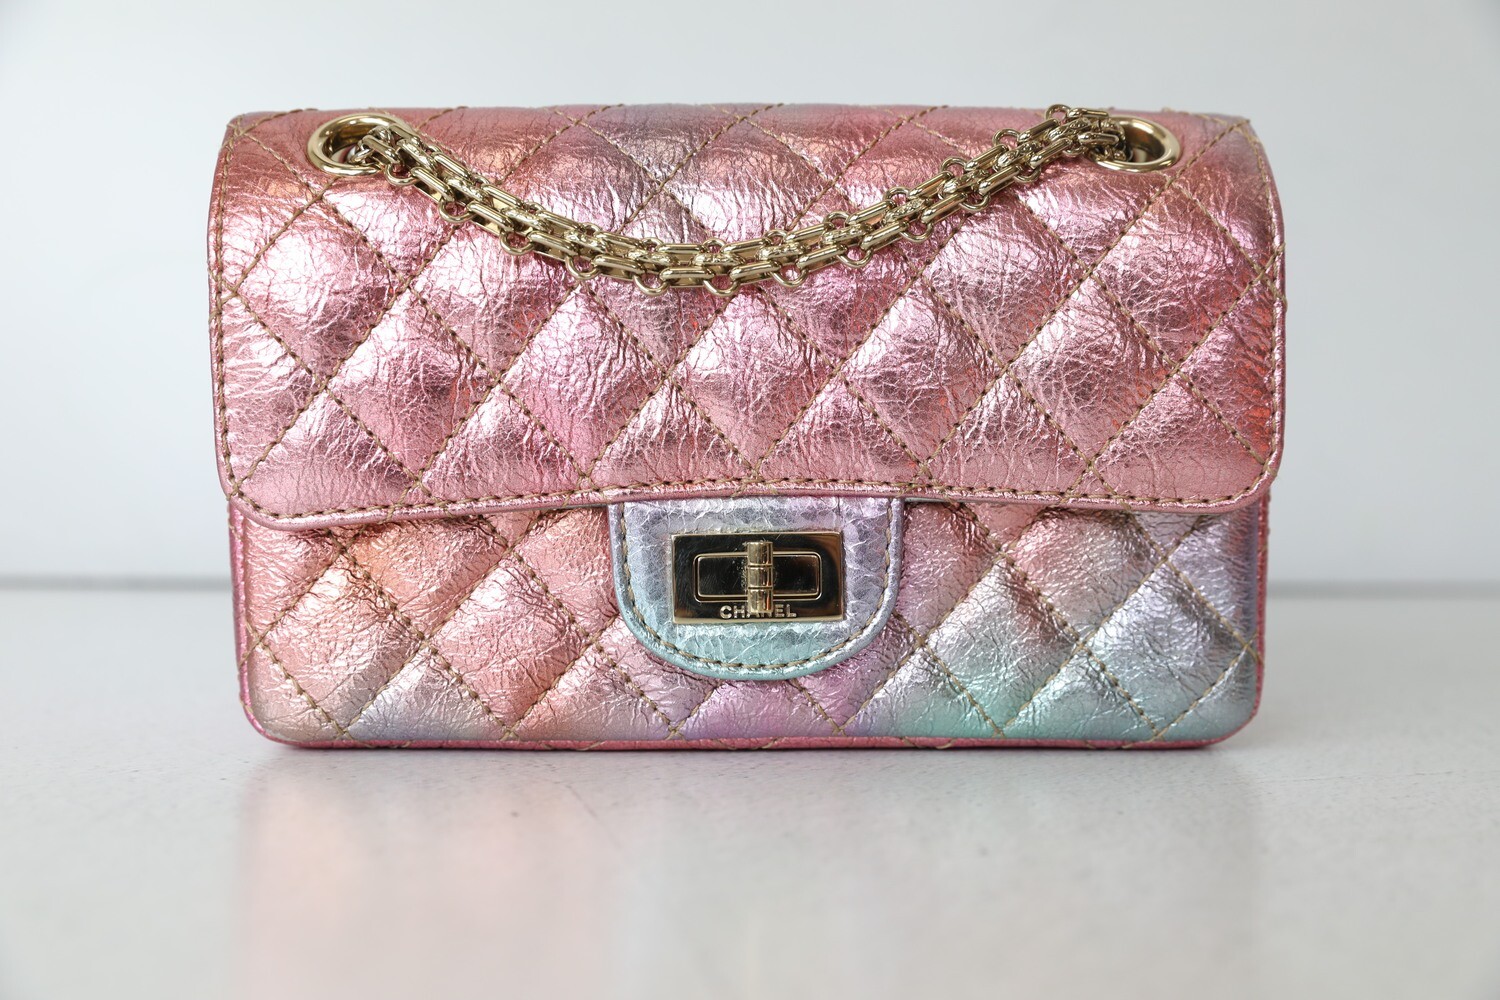 Chanel Rainbow Reissue 2.55 Flap Bag Quilted Multicolor Metallic